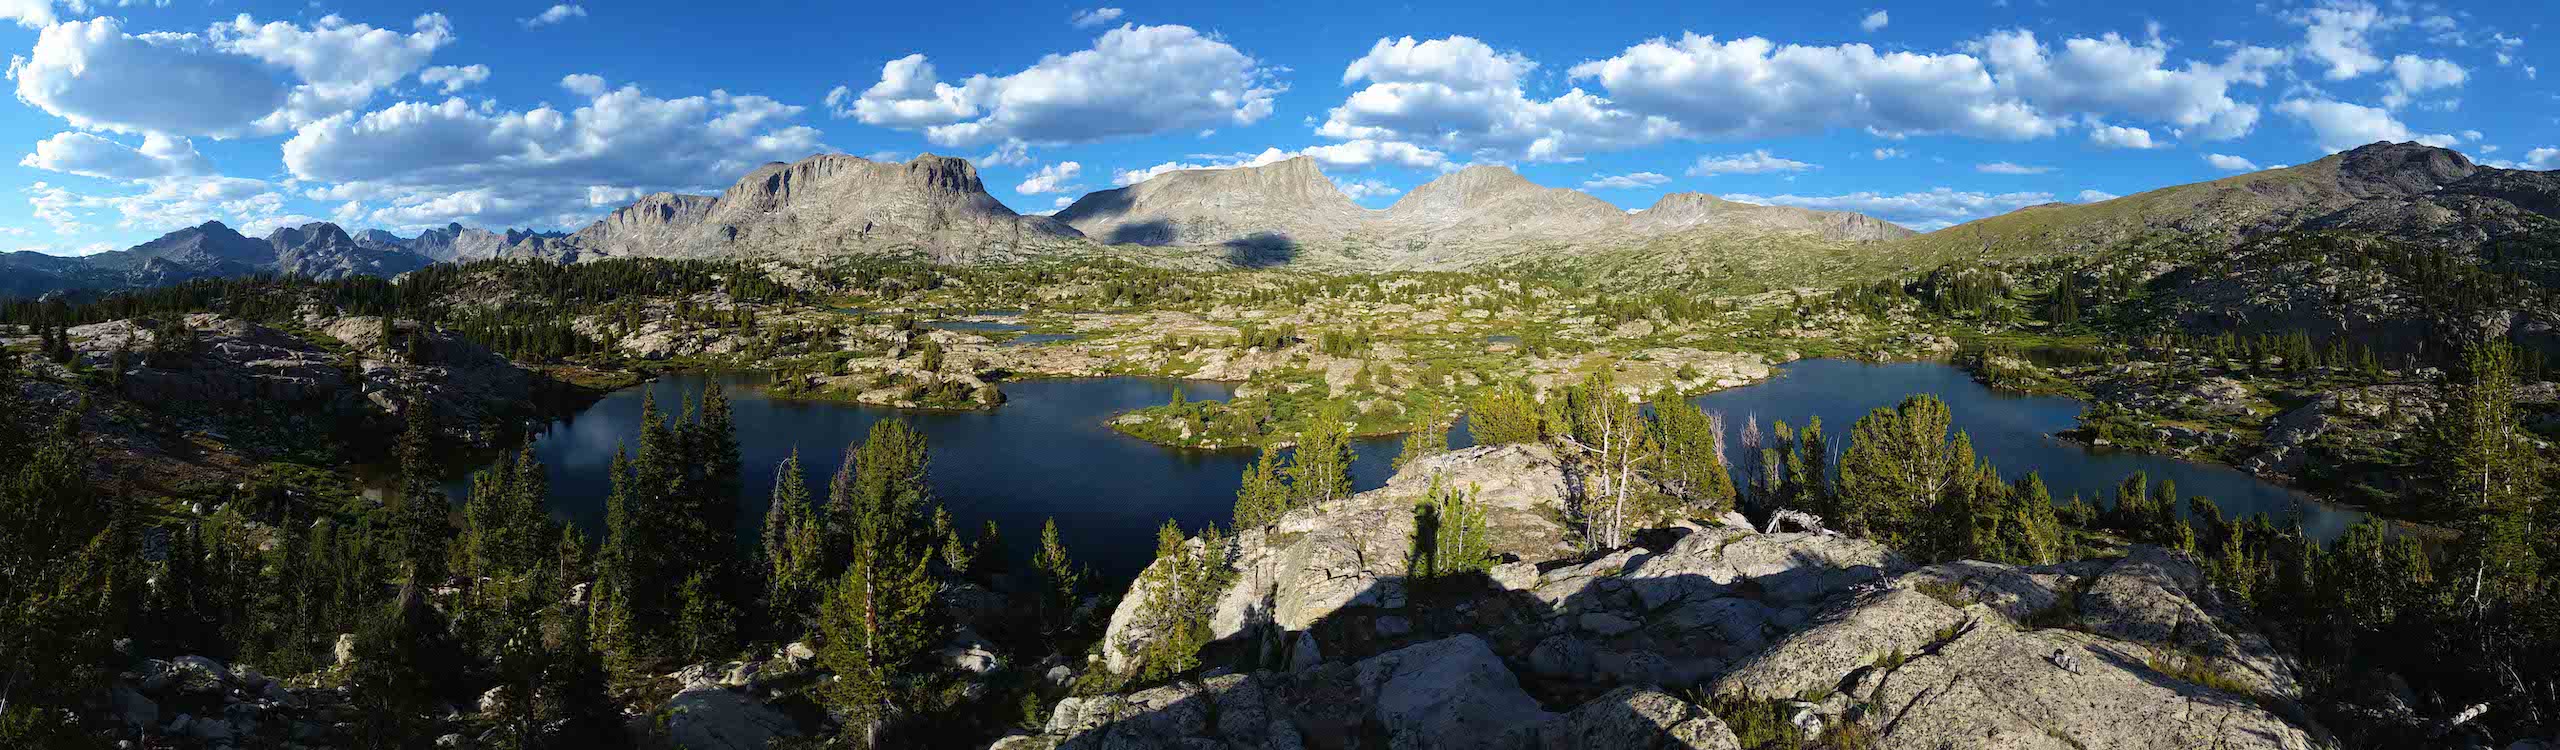 Spider Lake in Wyoming's Wind River Range. Photo by Brock Dallman